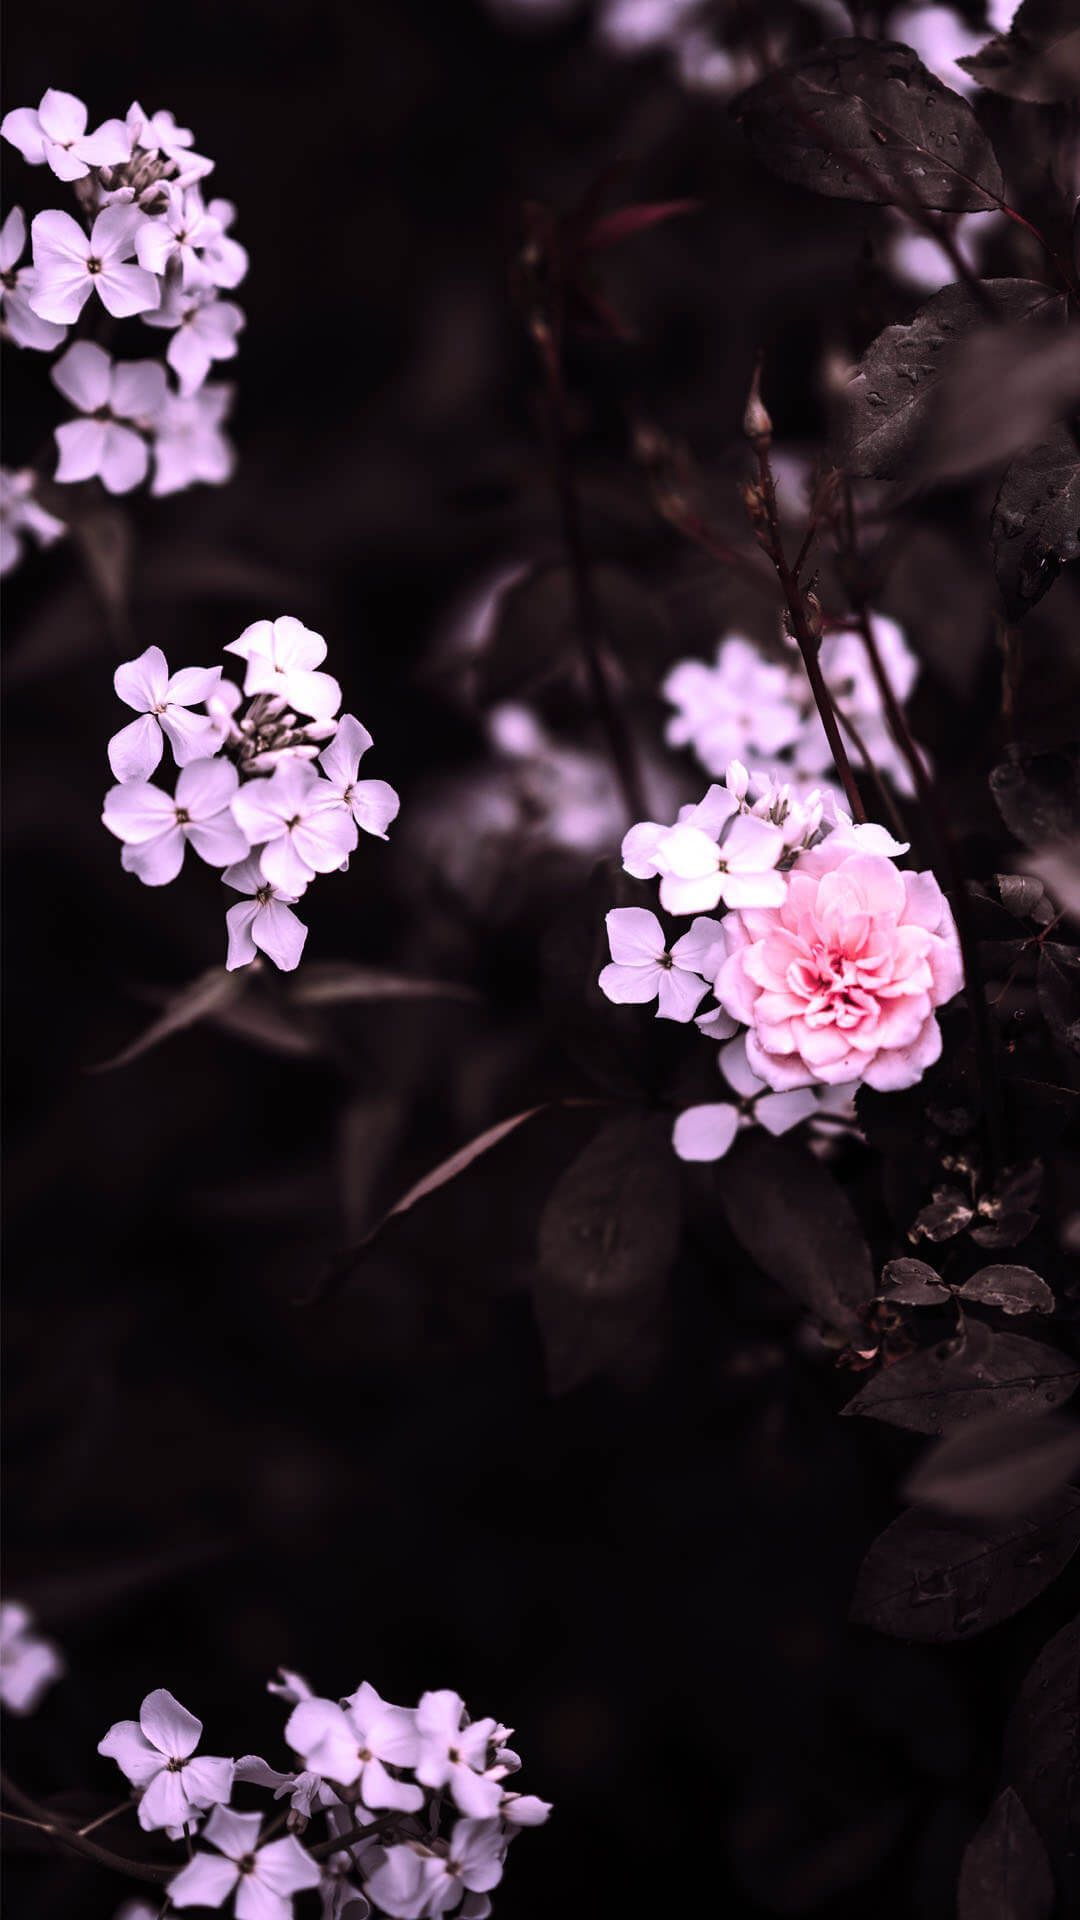 Flowers Aesthetic Wallpaper Landscape For Different Spaces